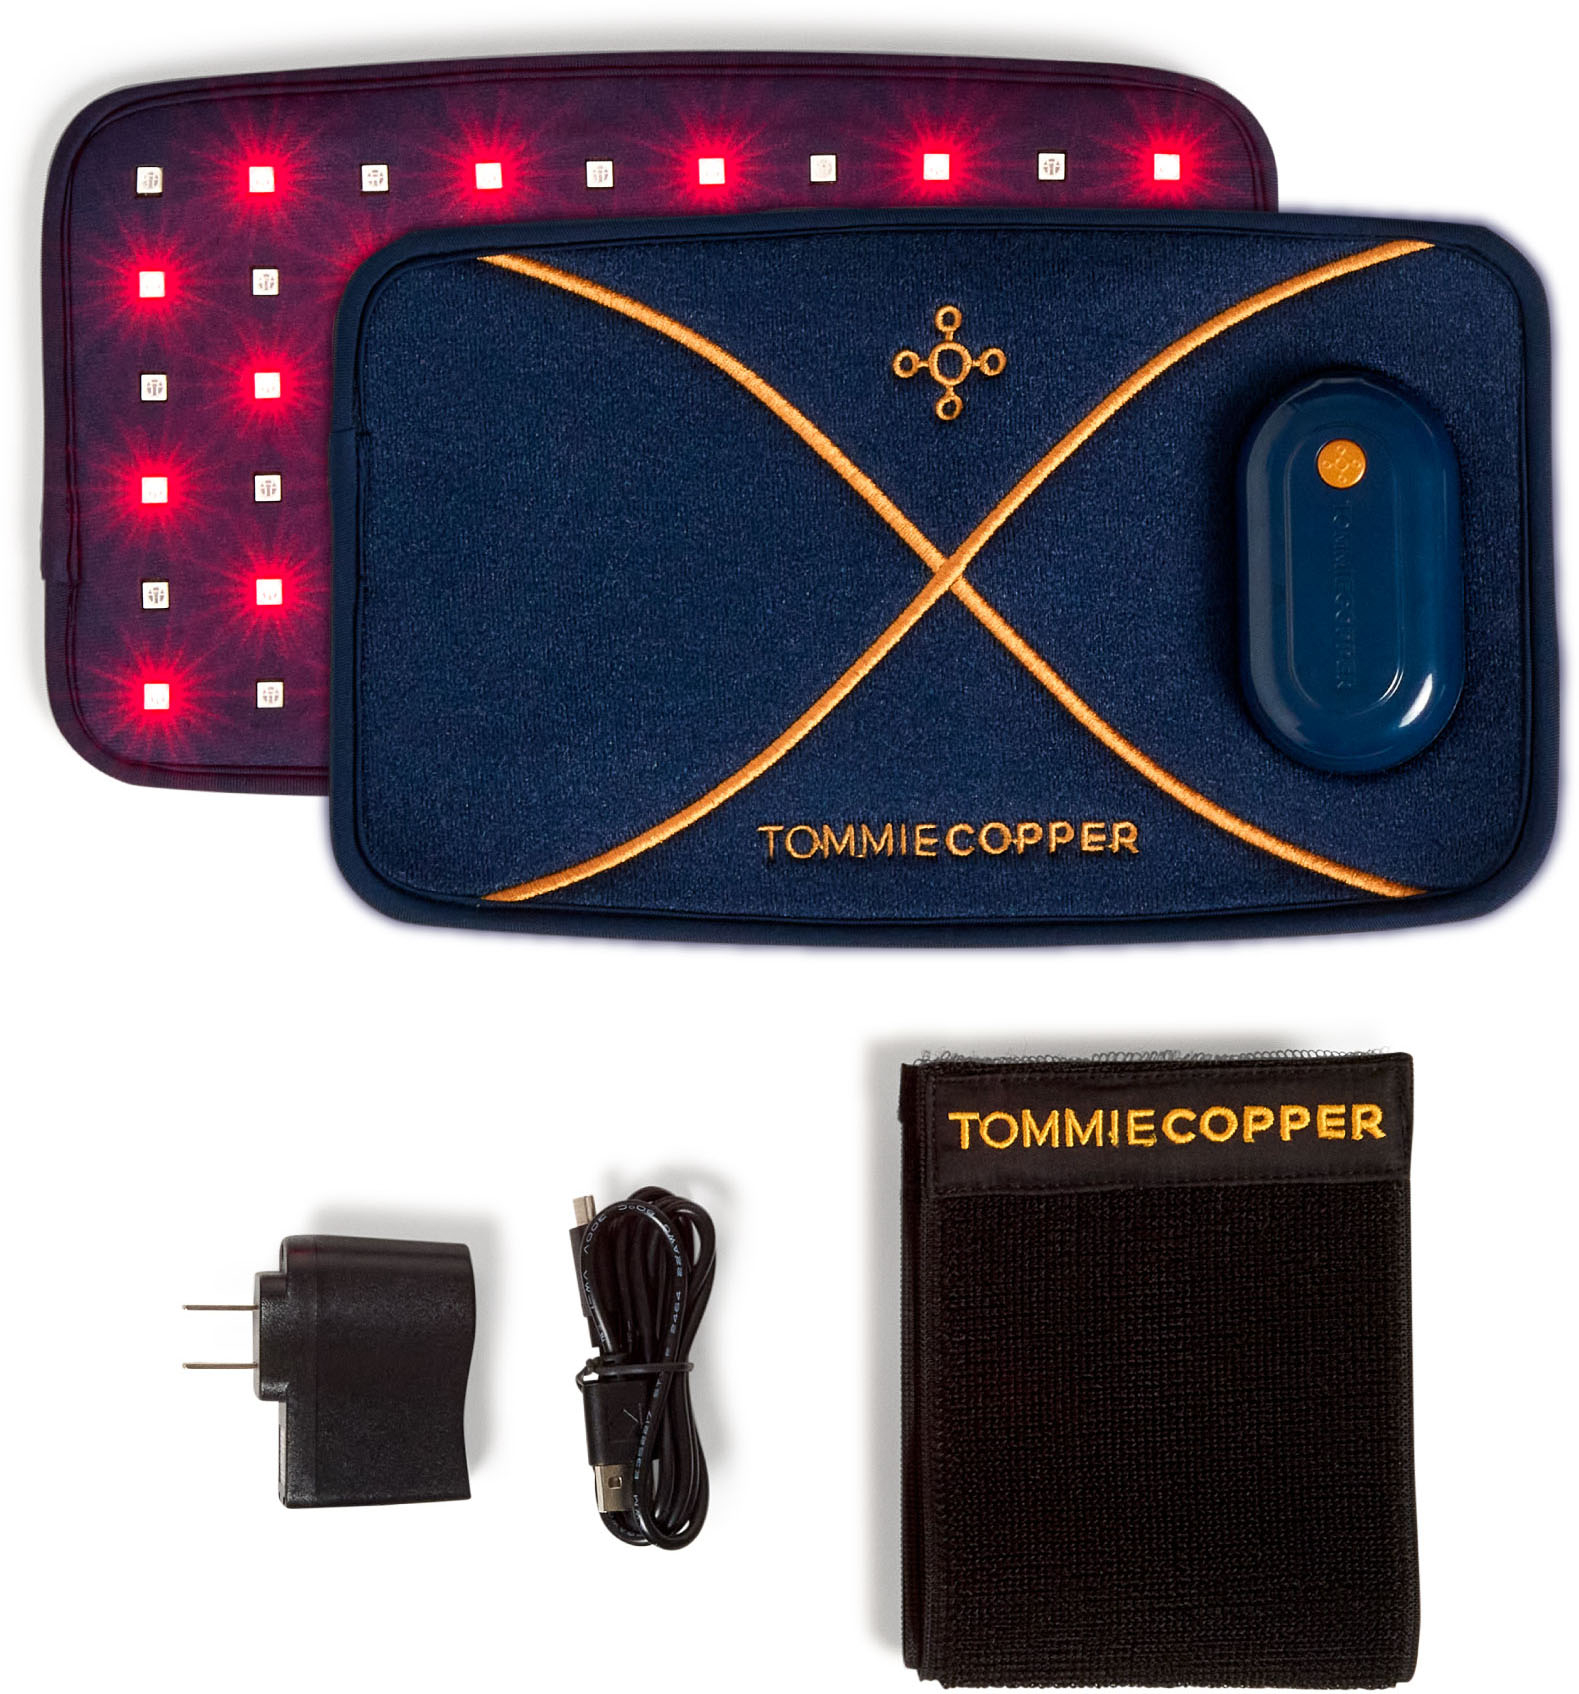 Tommie Copper TENS Therapy Device